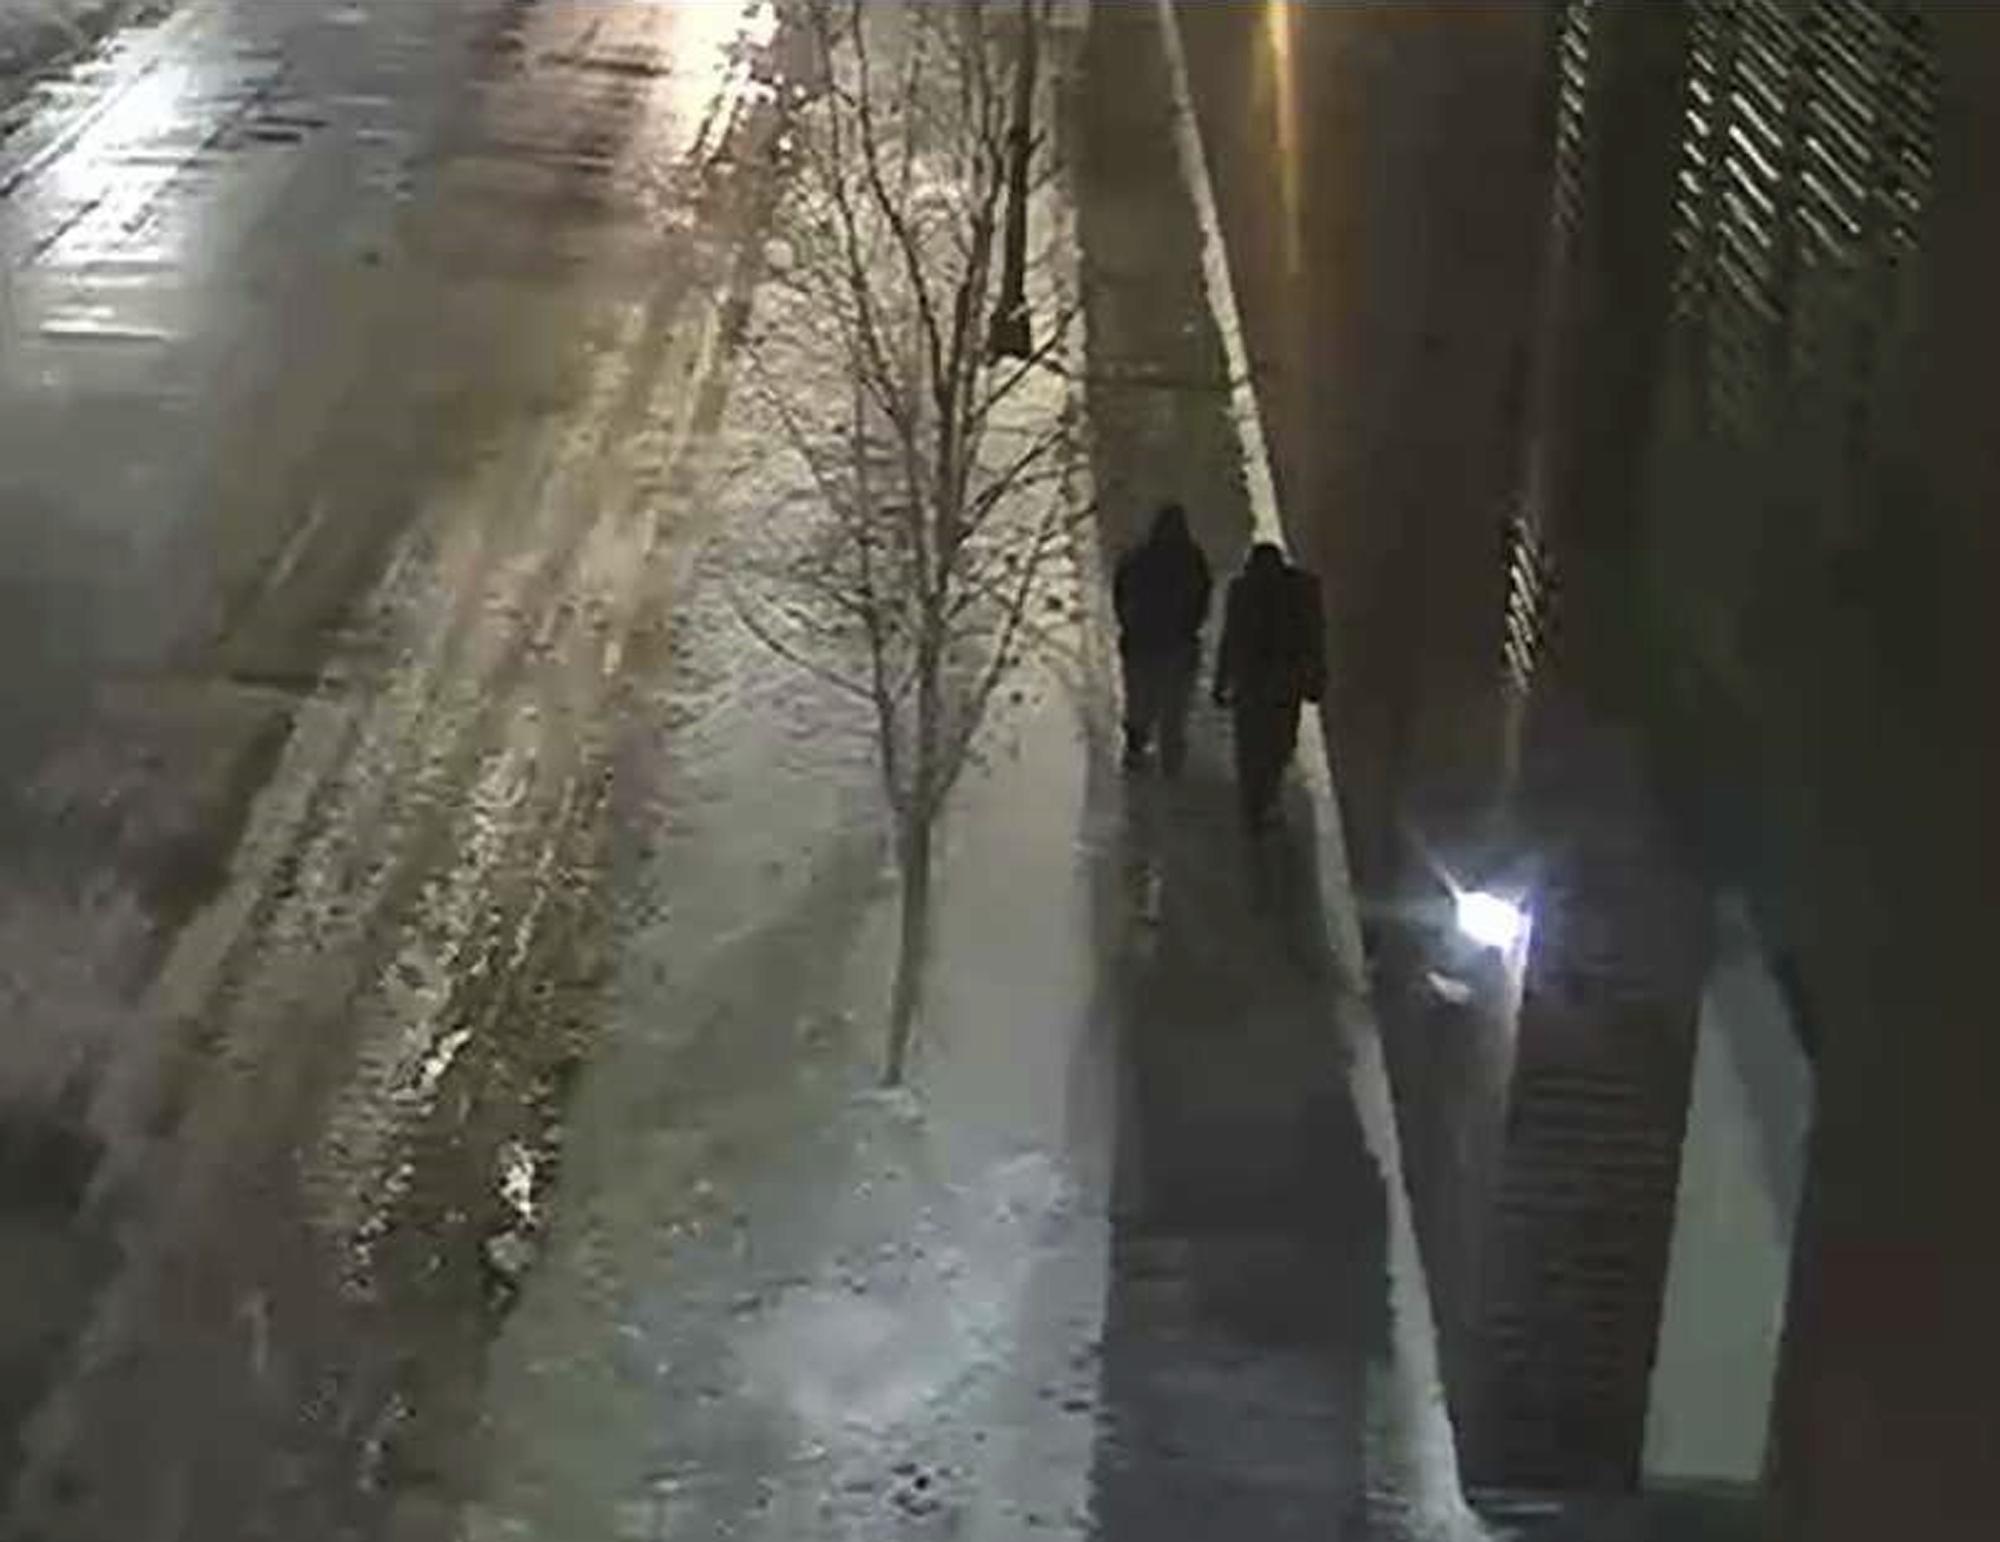 Chicago police this week released surveillance images of persons of interest sought in the alleged Tuesday morning attack on “Empire” actor Jussie Smollett. (Courtesy of Chicago Police Department via AP)